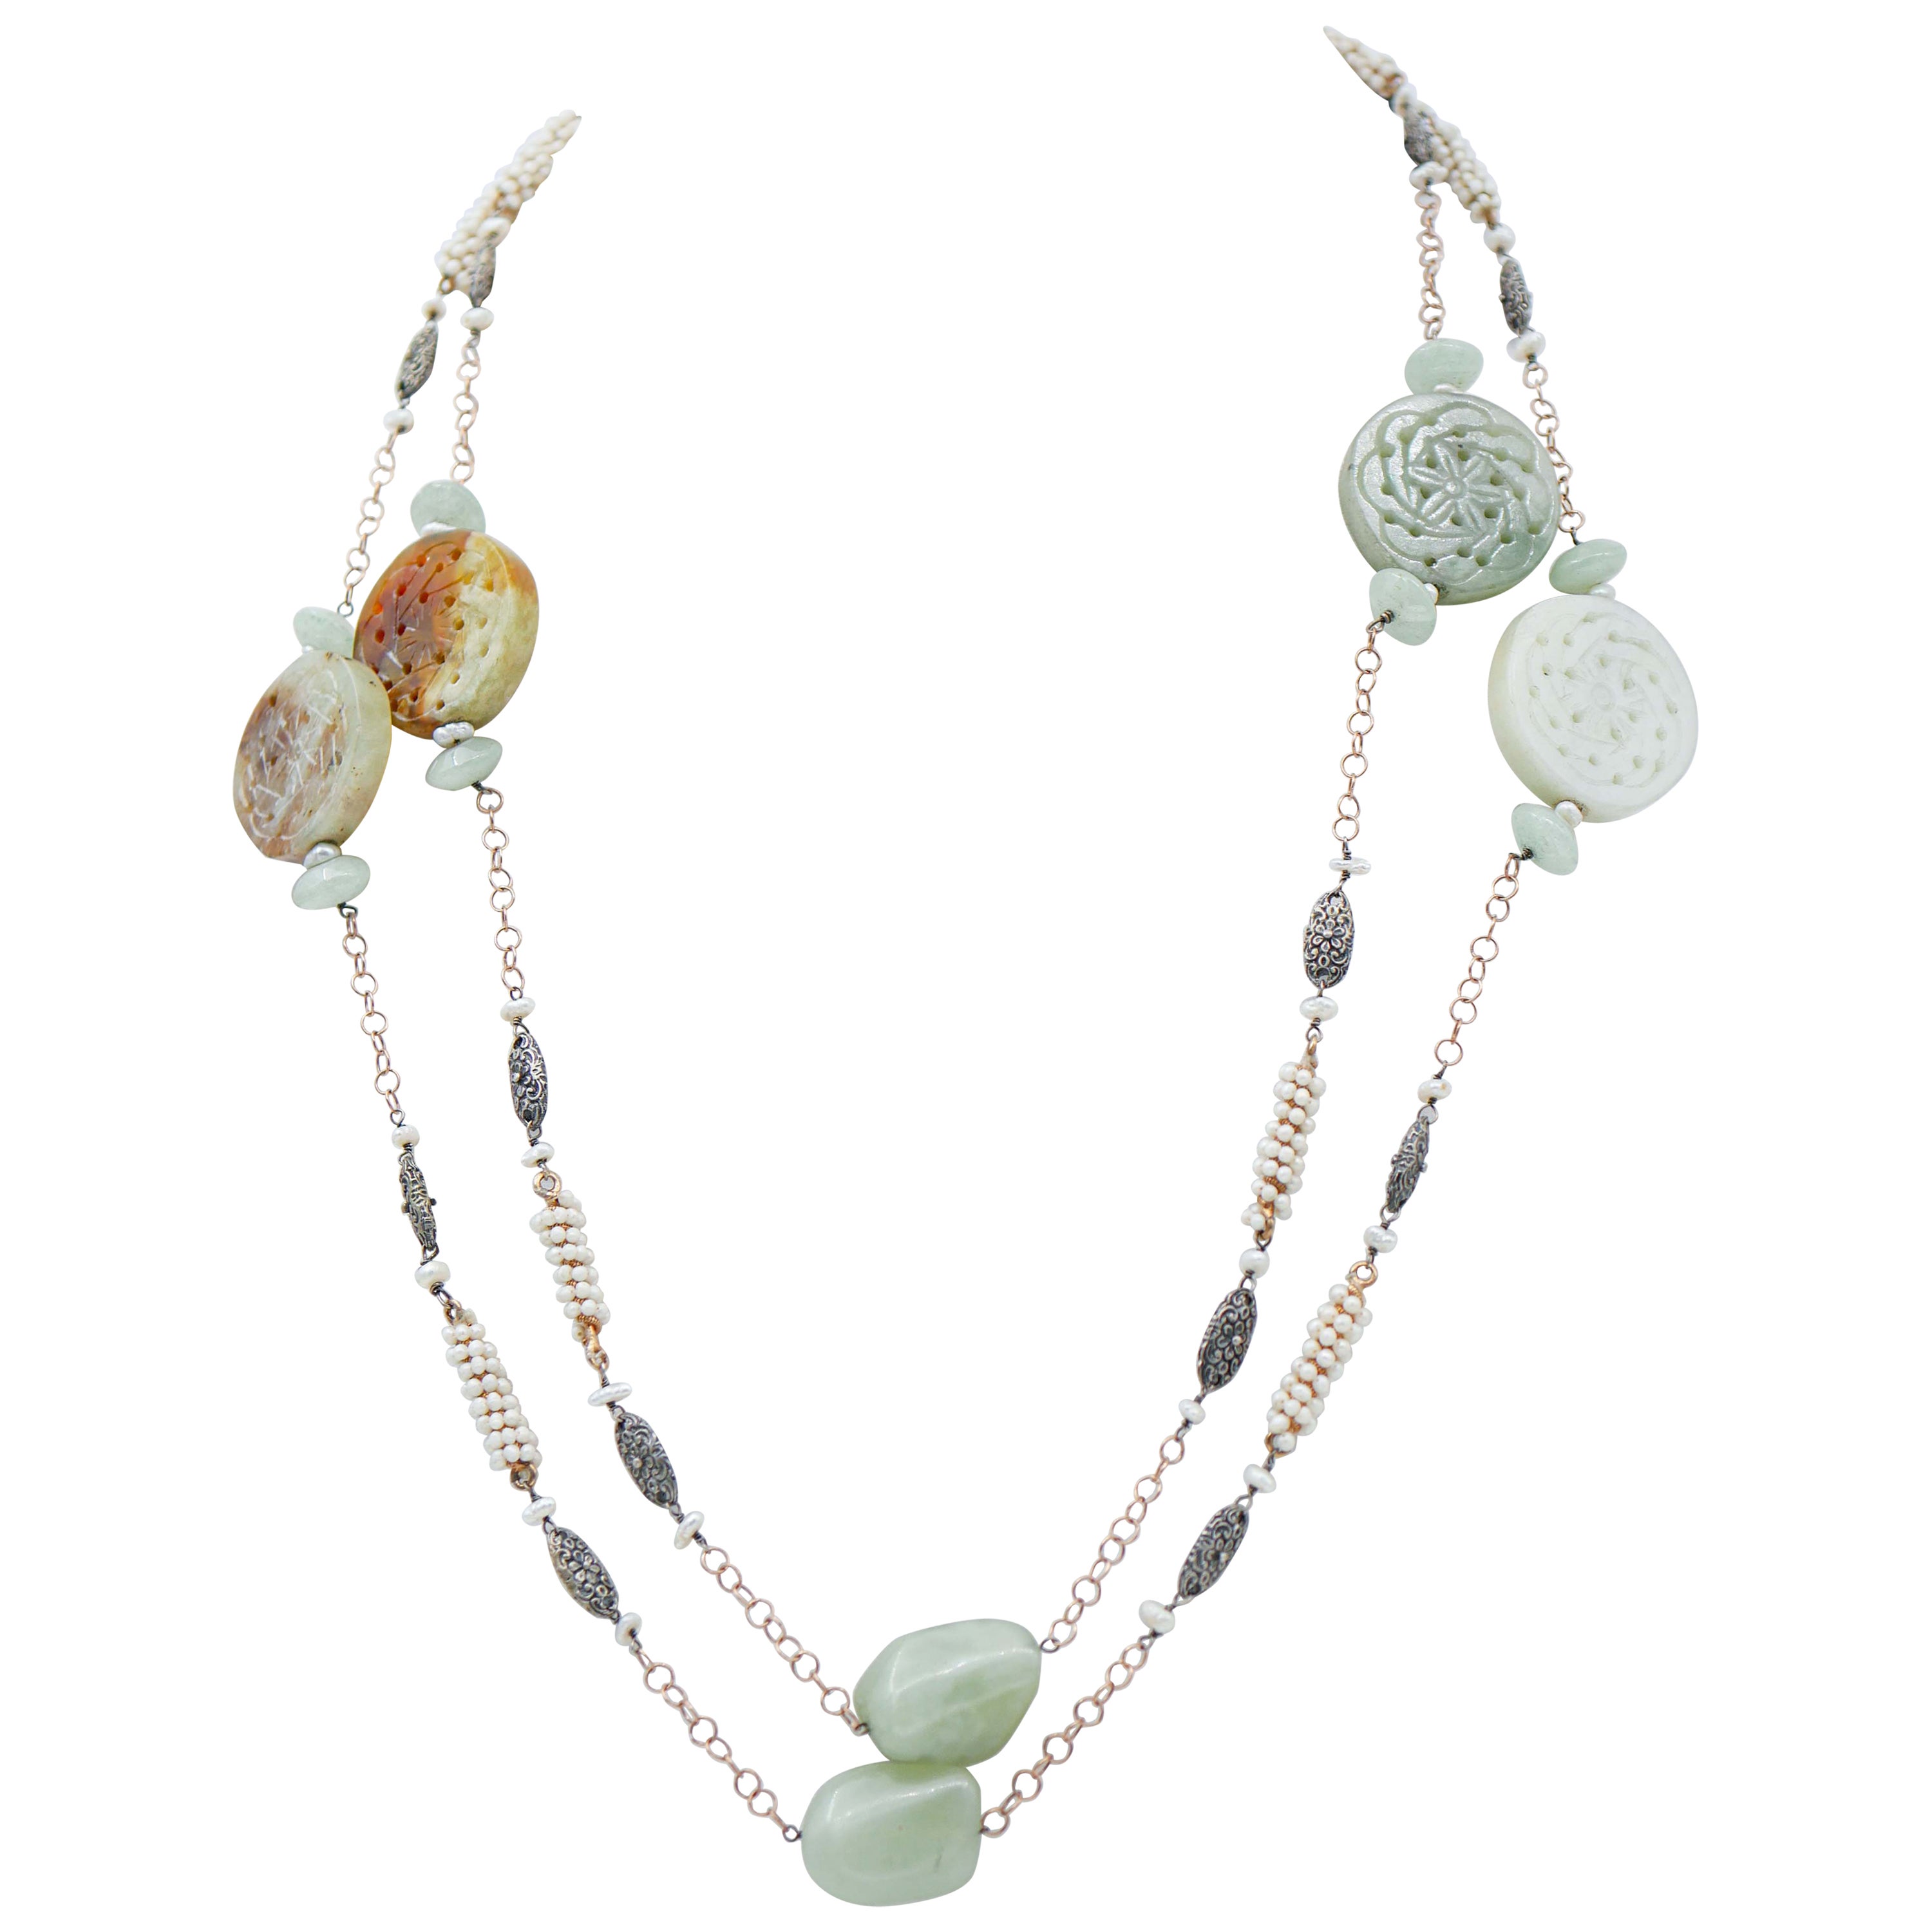 Jade, Pearls, Rose Gold and Silver Retrò Necklace